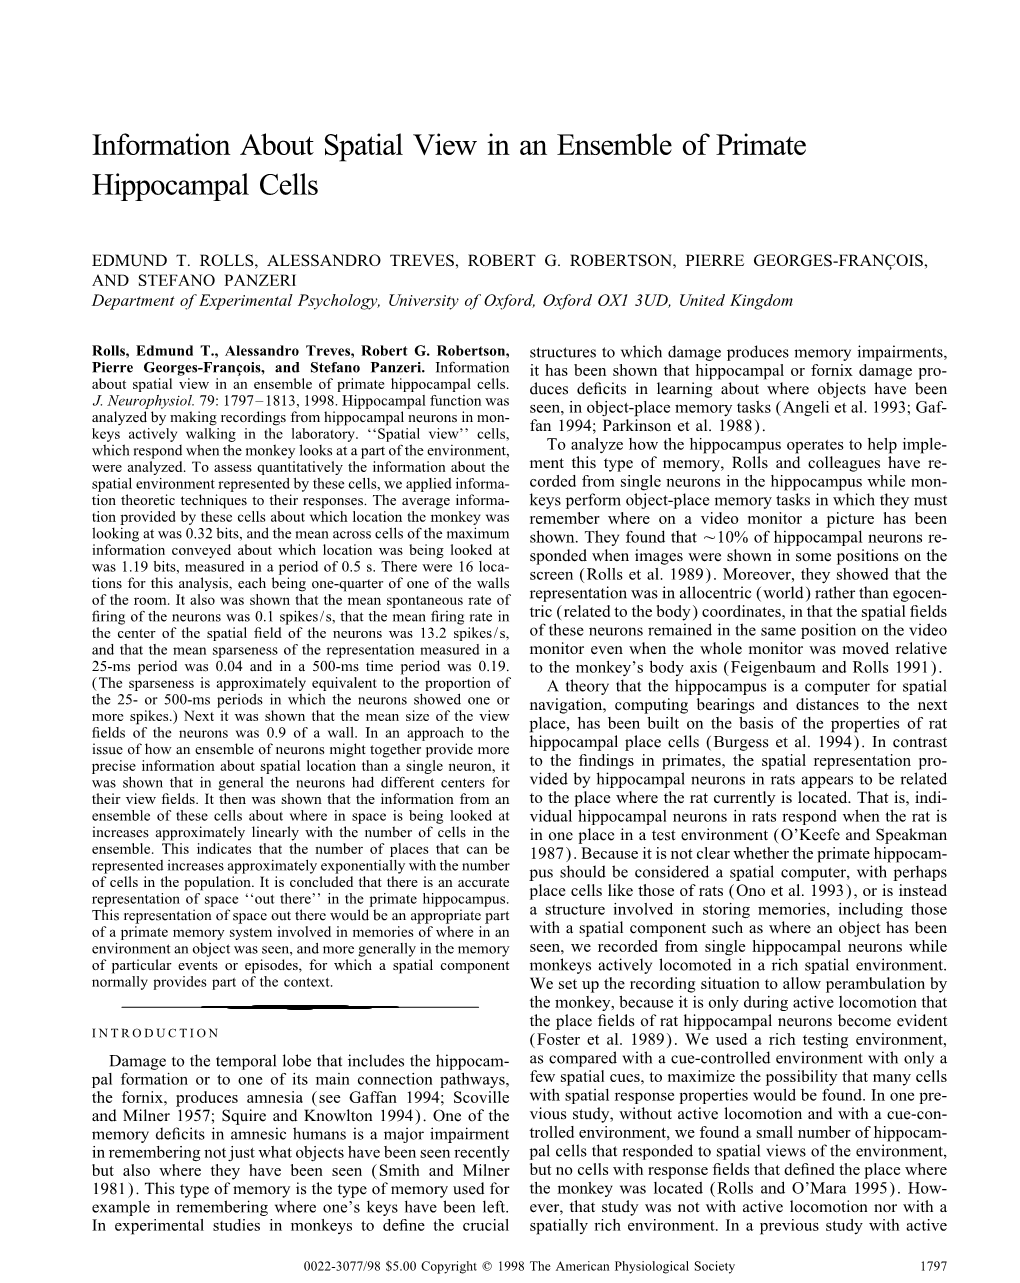 Information About Spatial View in an Ensemble of Primate Hippocampal Cells